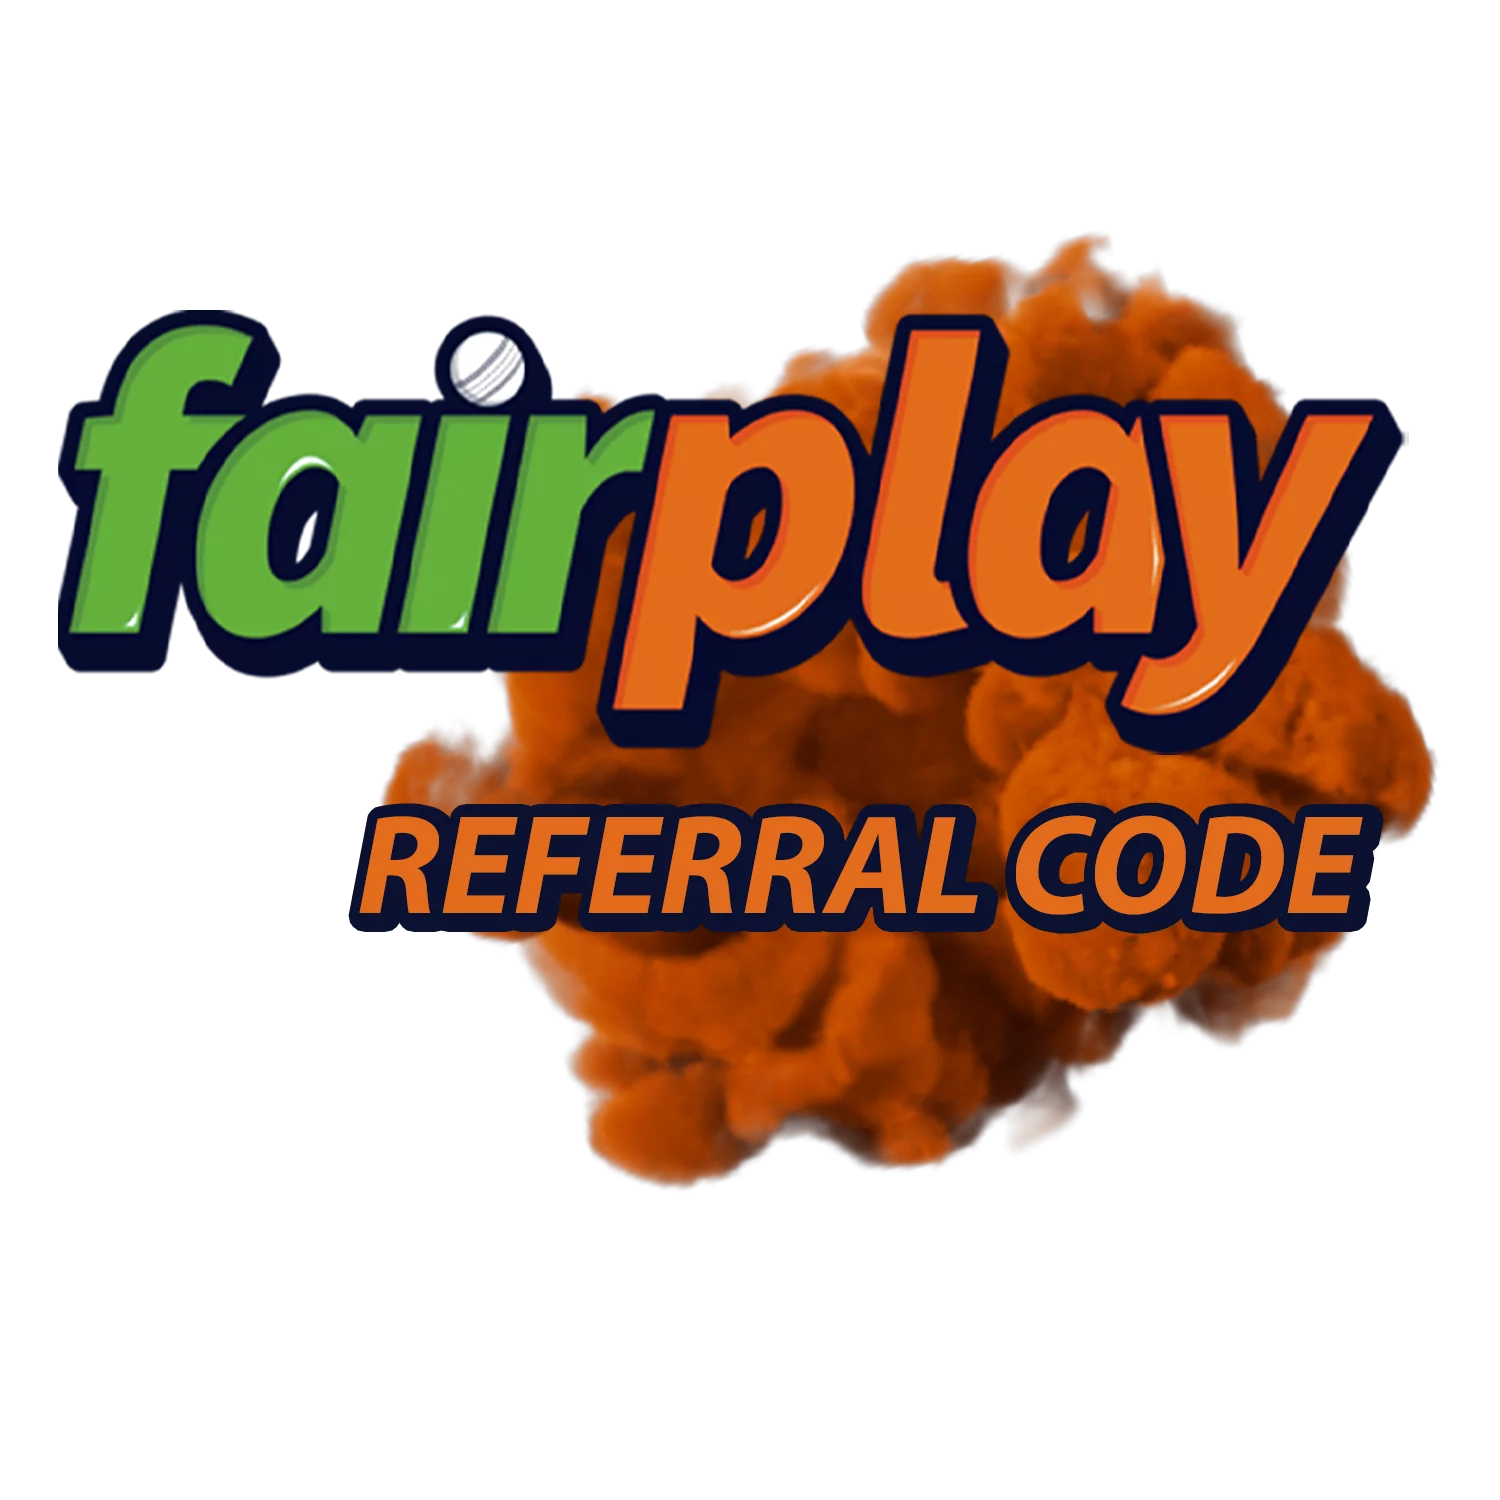 Use the Fairplay referral code to register your account.